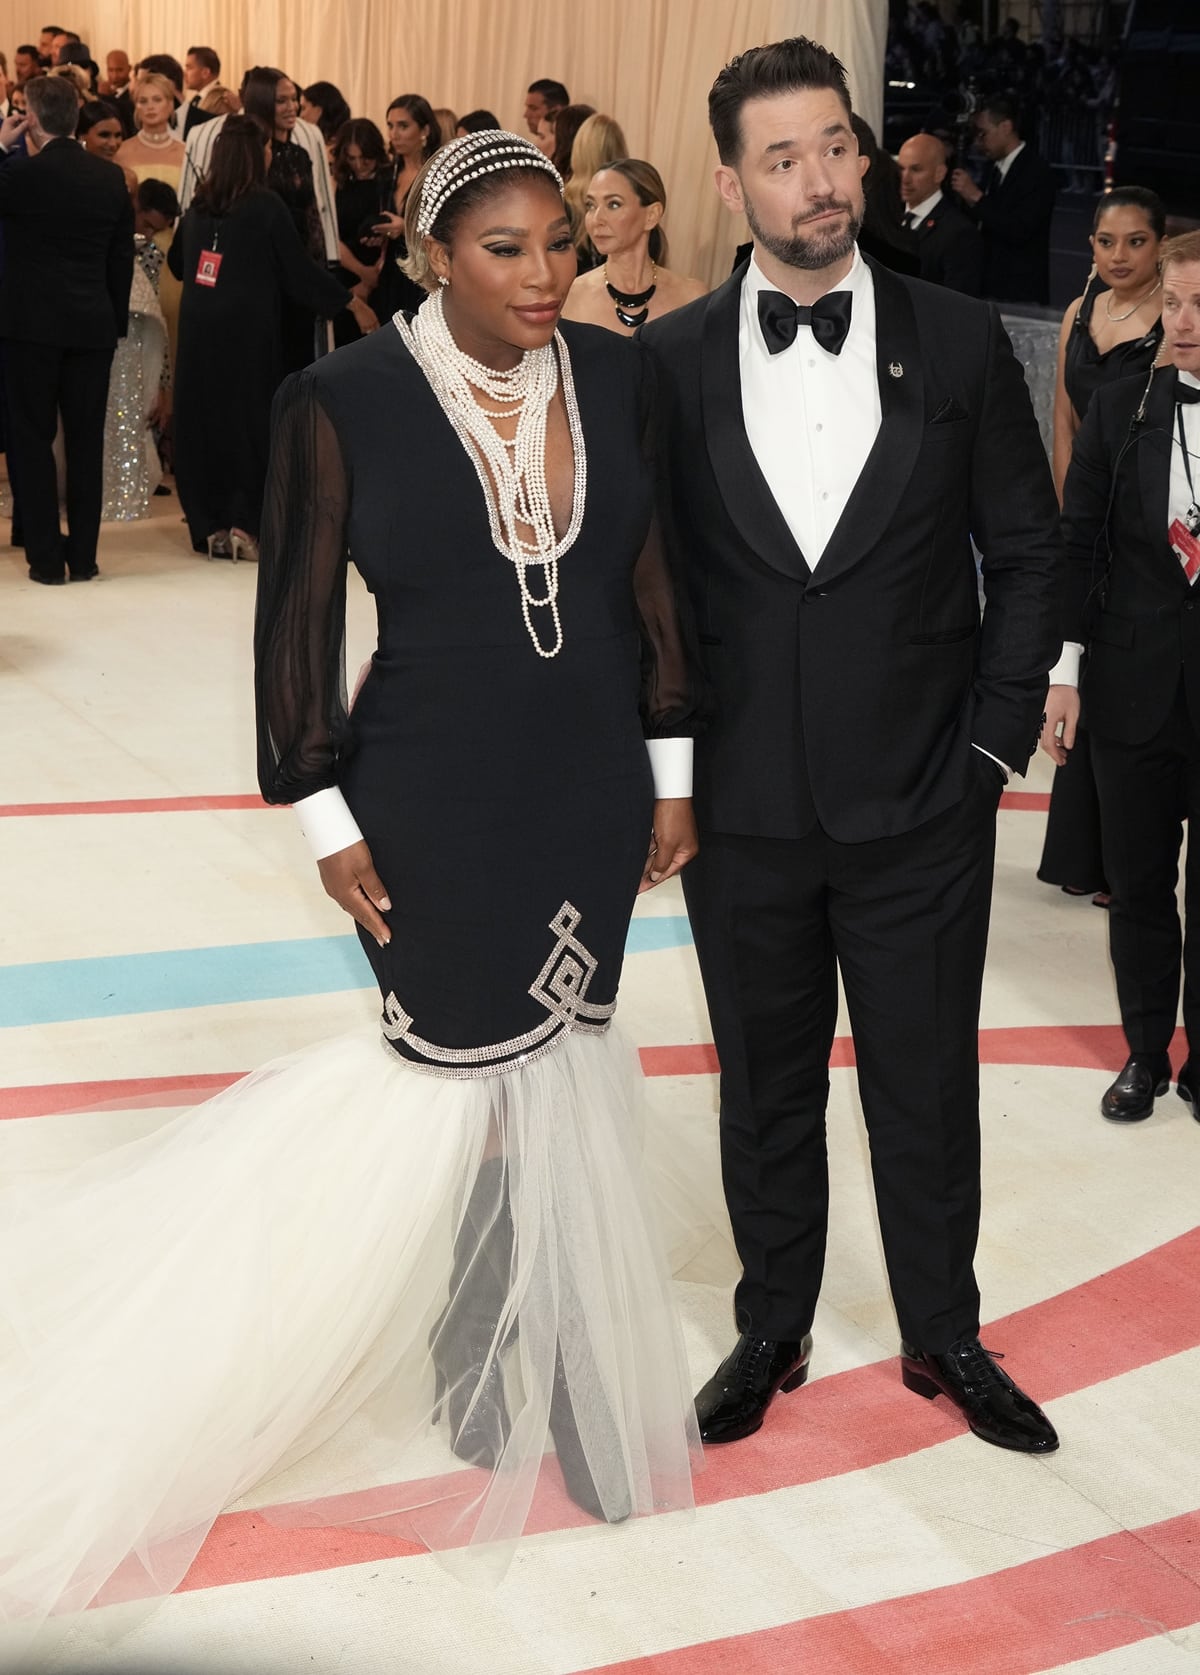 Serena Williams and Alexis Ohanian made a grand announcement at the highly-anticipated Met Gala in New York City - they're expecting their second child